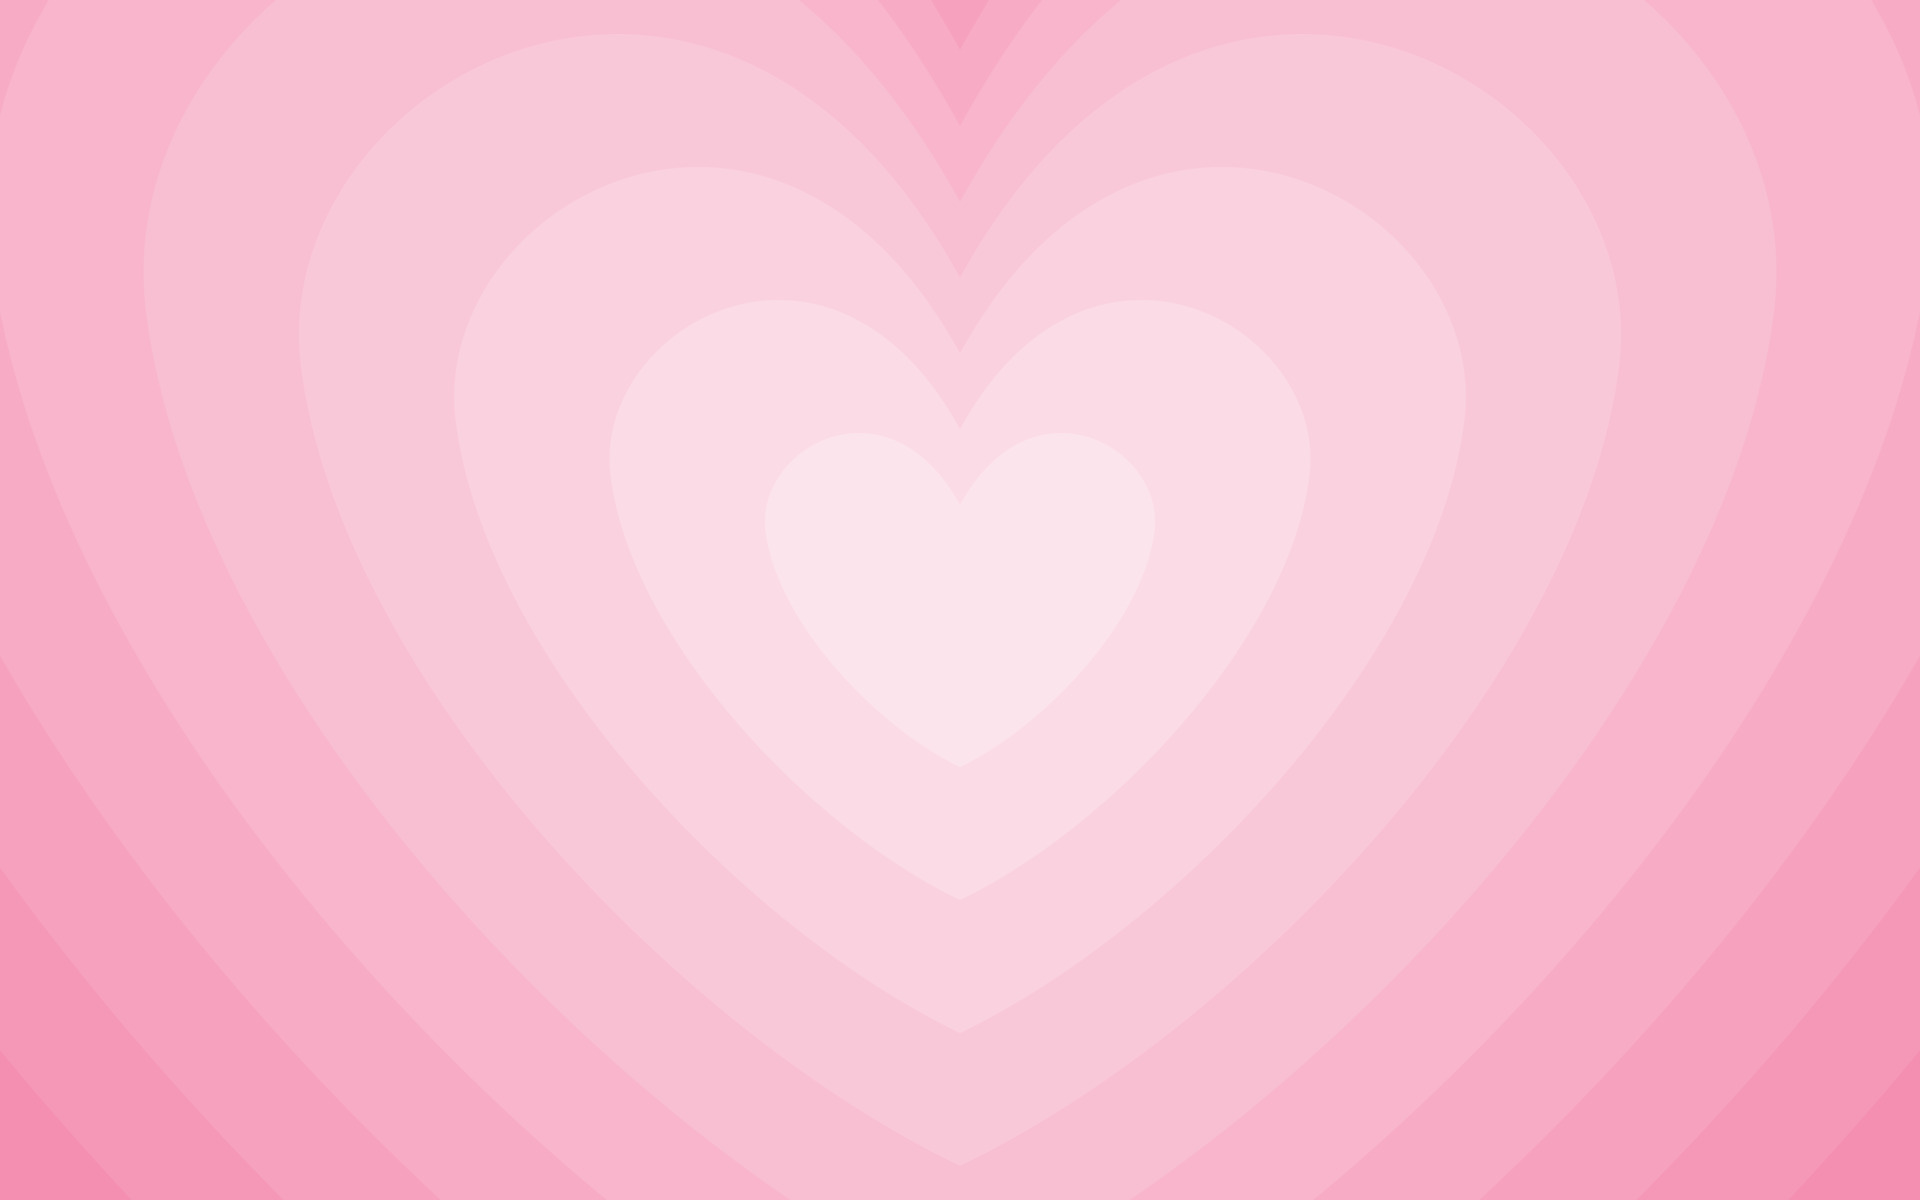 A pink heart shaped background with white lines - Pink heart